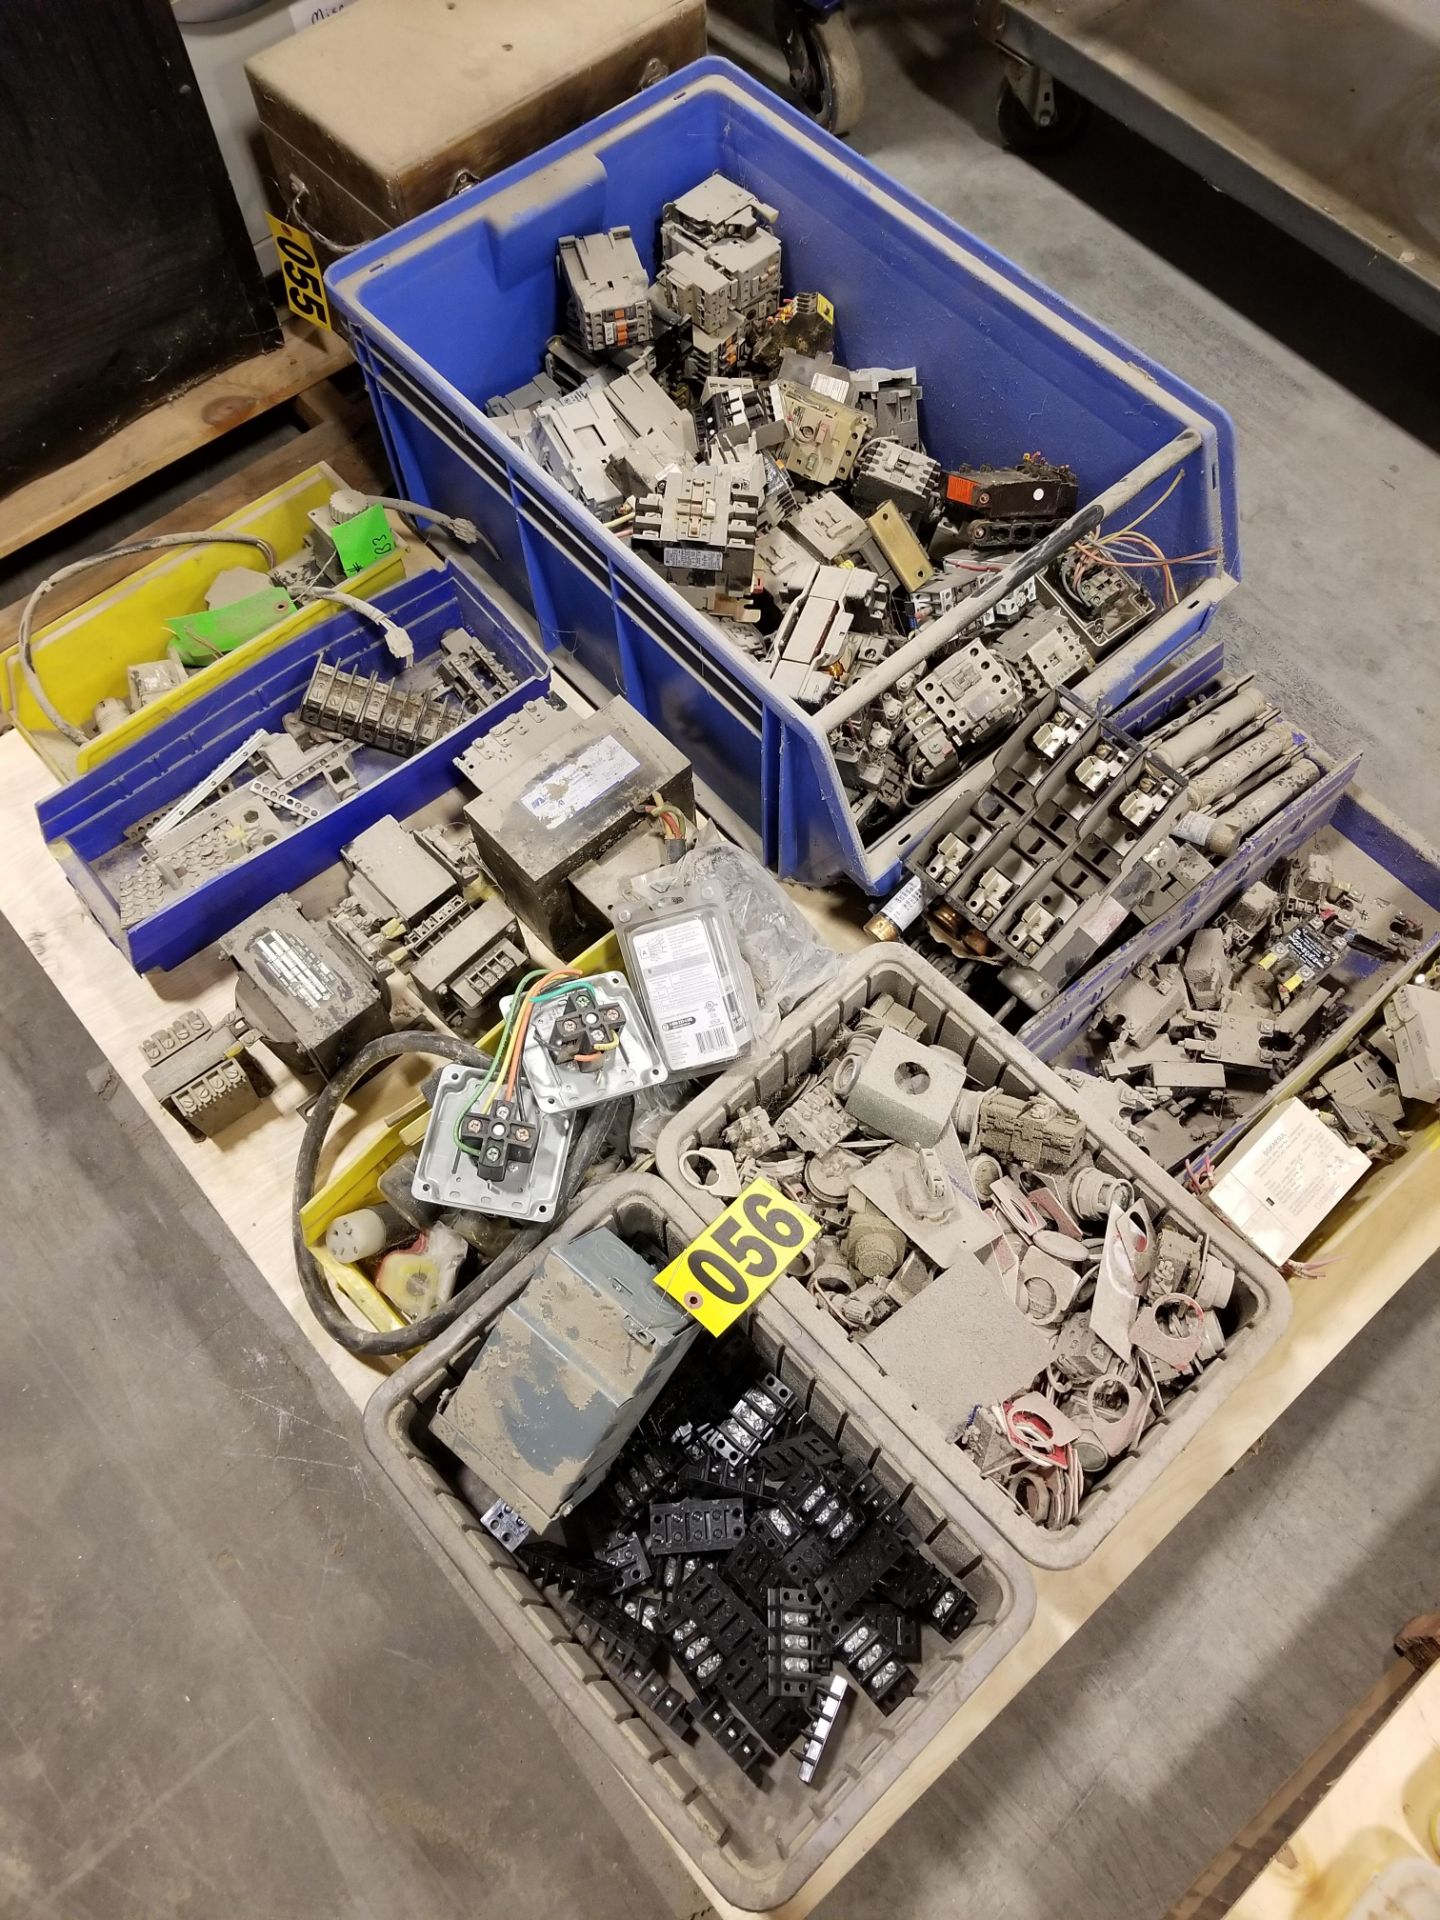 Skid lot - misc electrical components